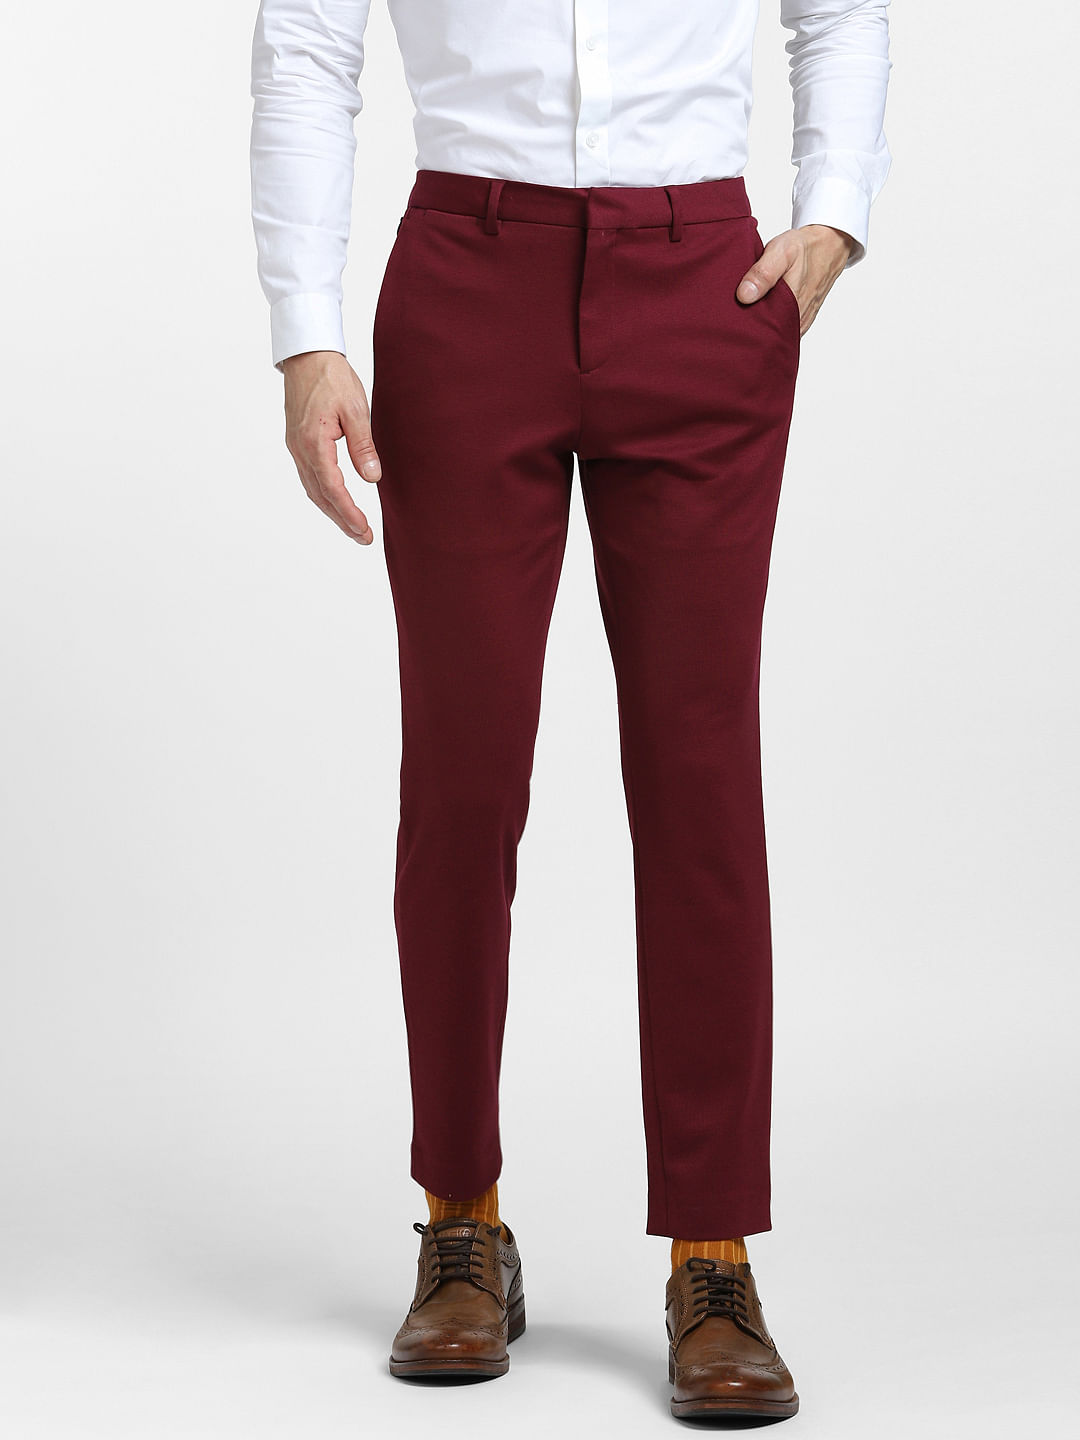 Buy White Mid Rise Striped Pants For Women Online in India | VeroModa